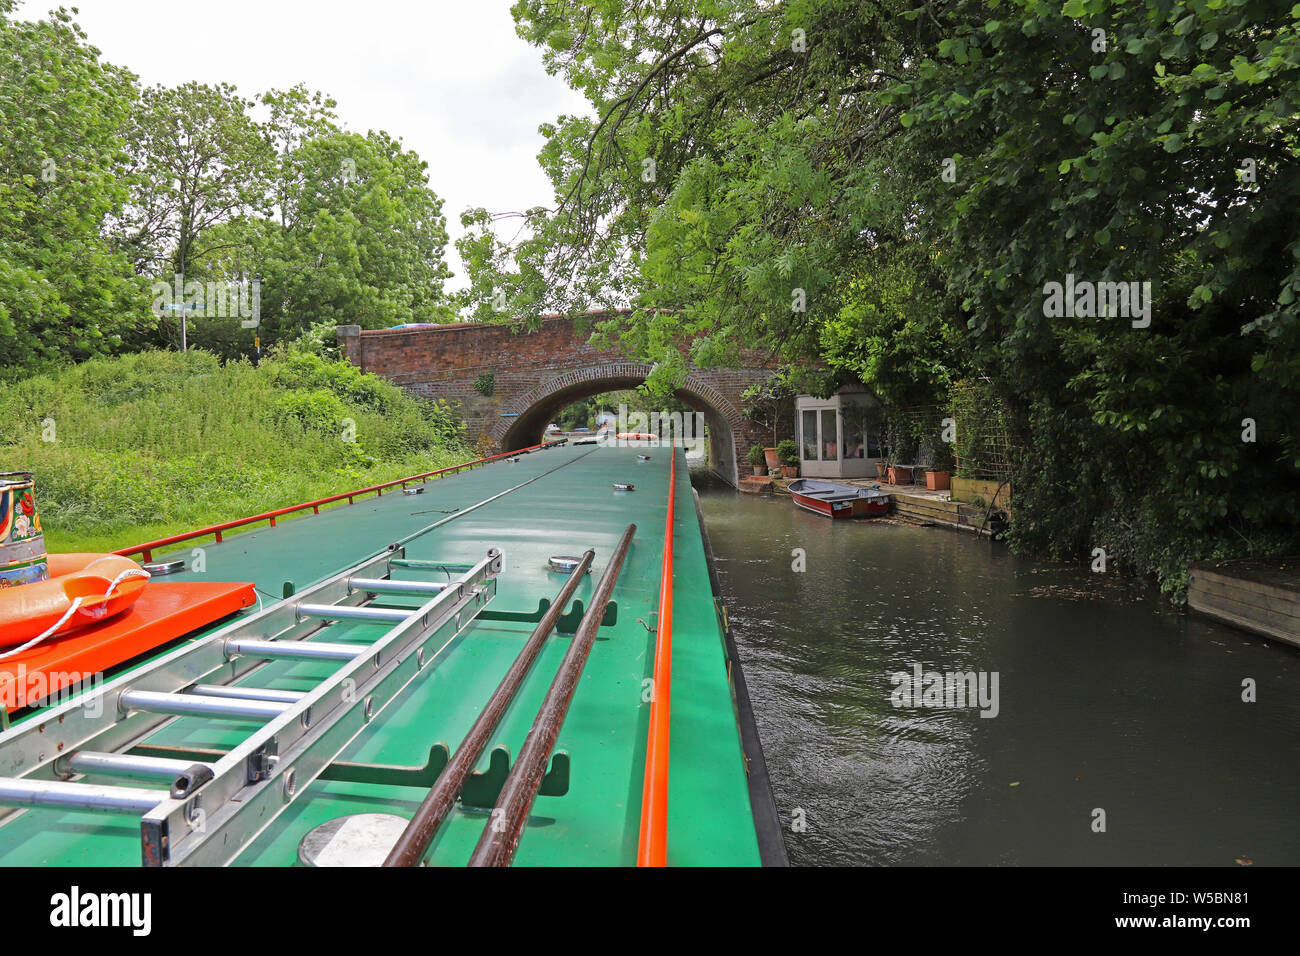 It's a tight fit getting a 68 foot (21 meter) long canal boat under bridges, Basingstoke Canal, UK. Stock Photo